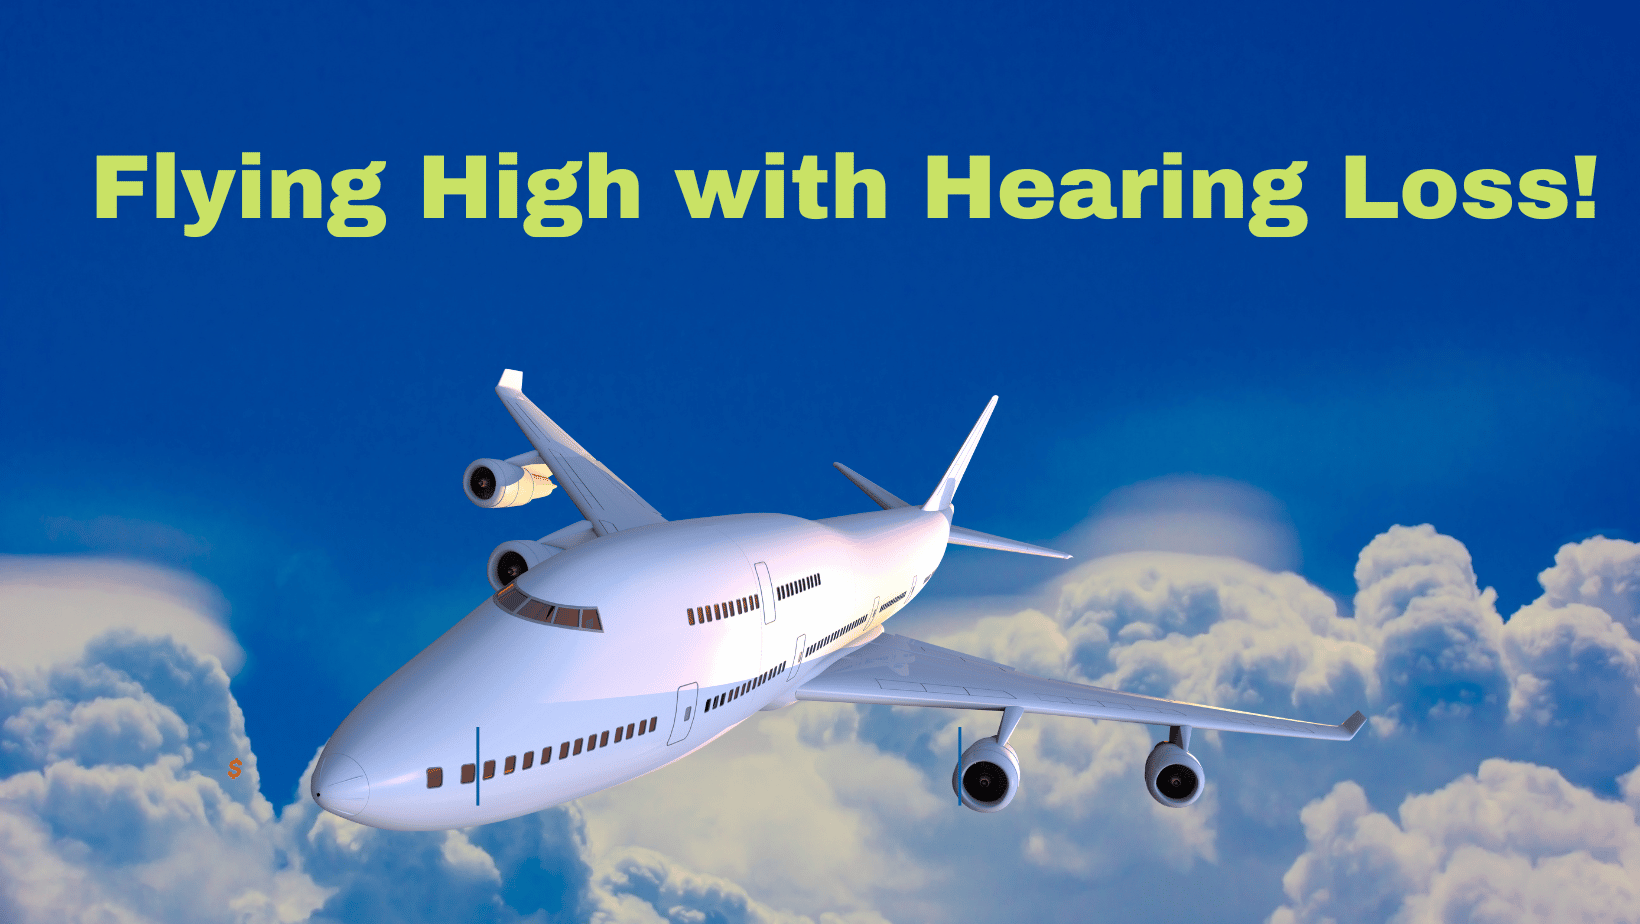 Featured image for “Flying High with Hearing Loss”